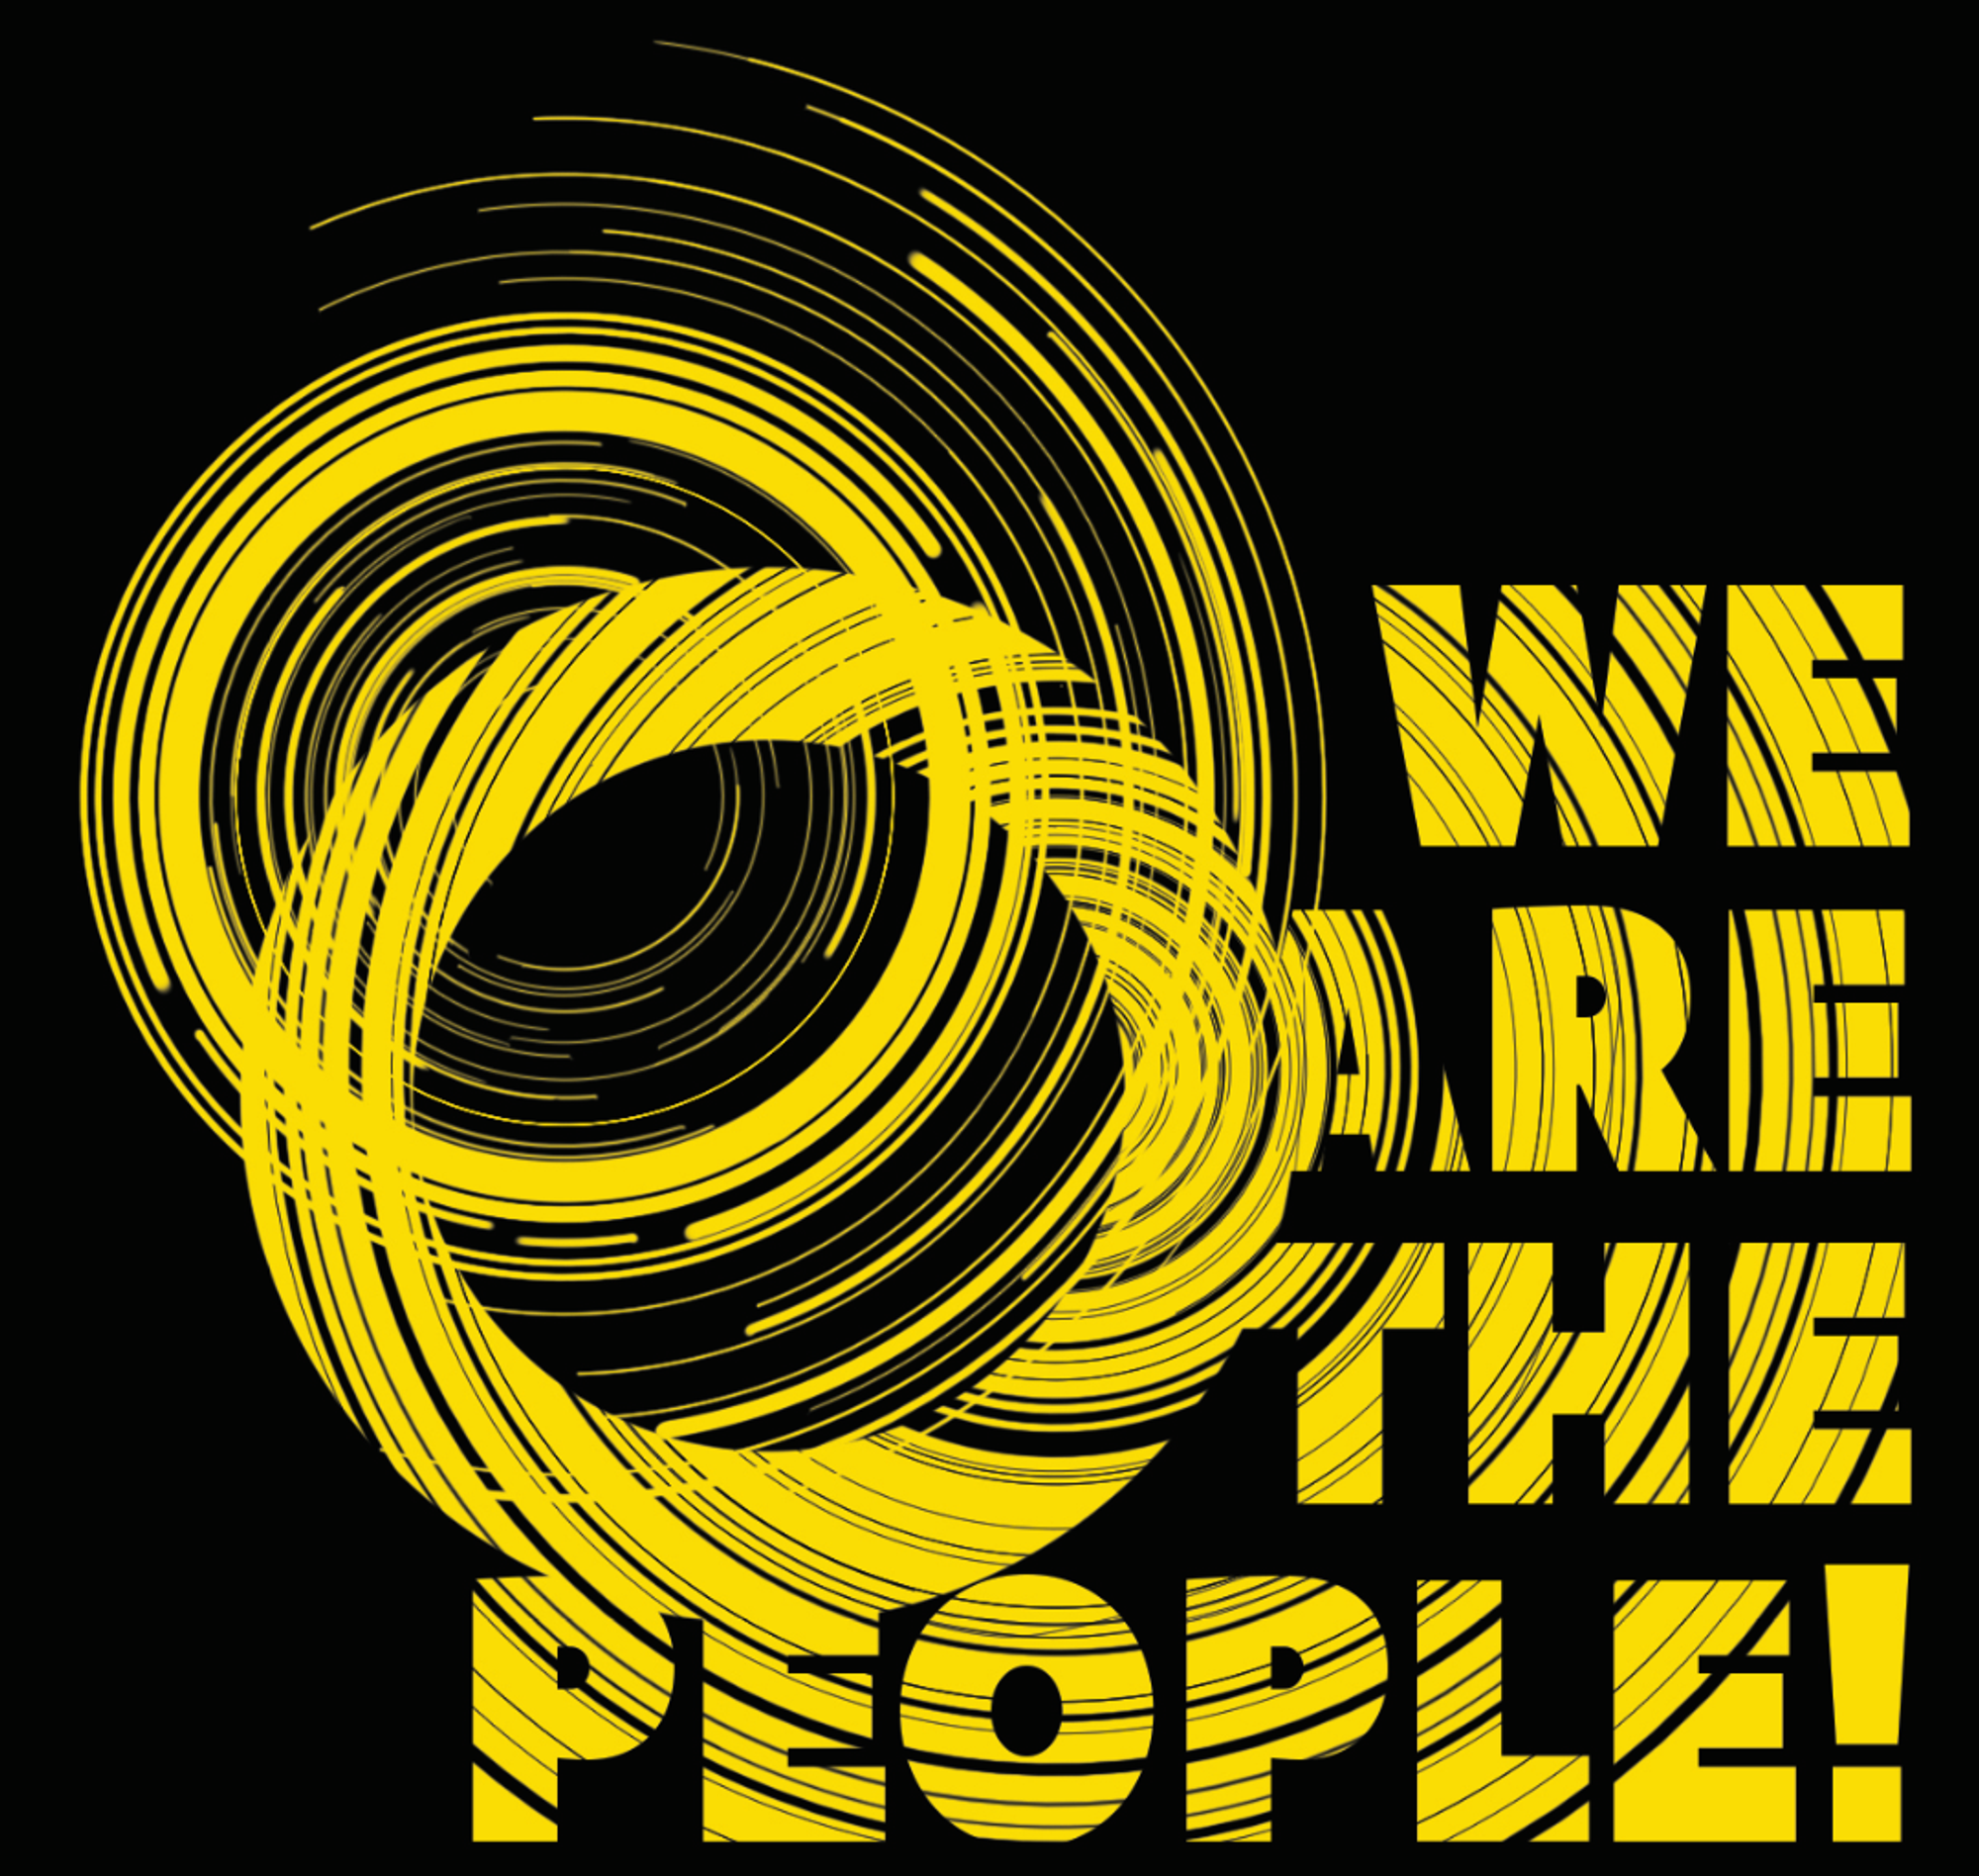 we are the people!